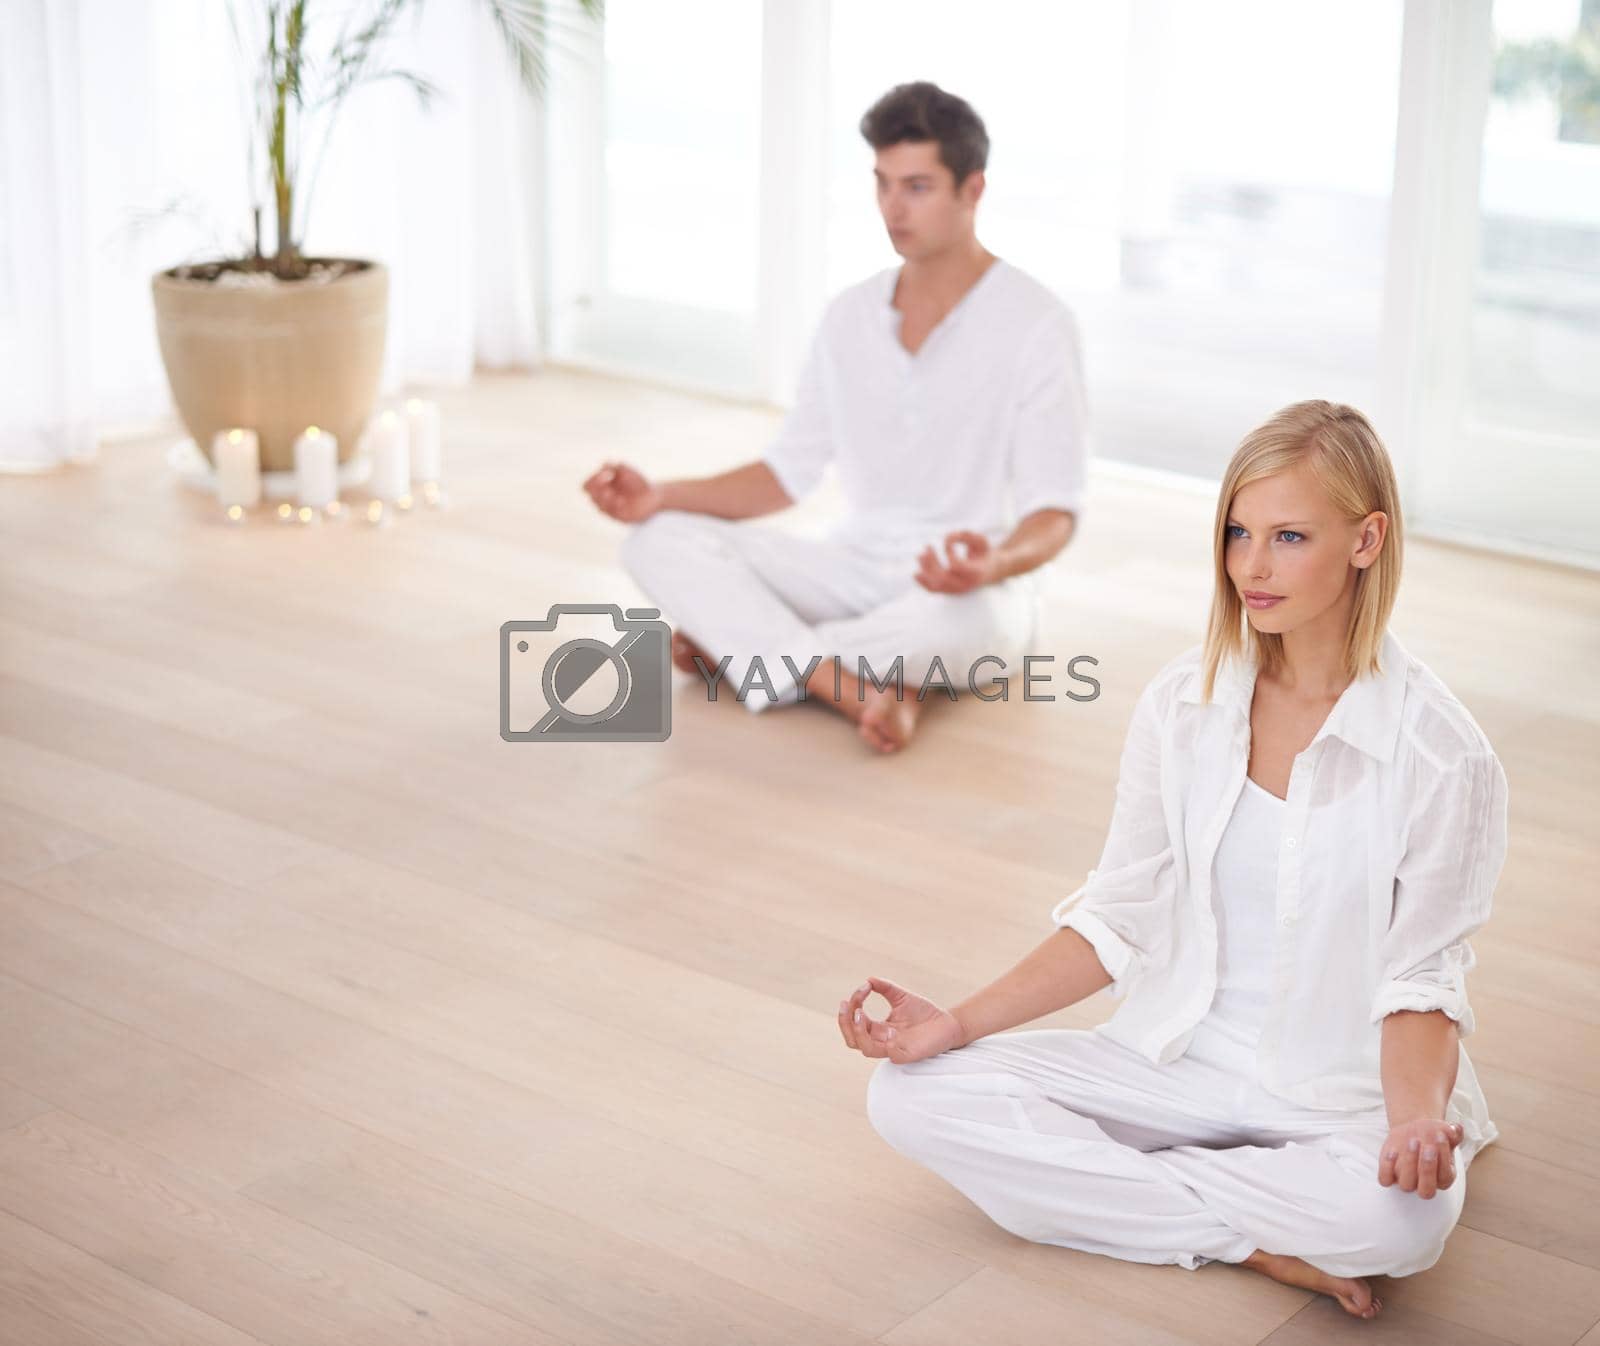 On their way to enlightenment...Two people sitting in the lotus position in a yoga studio